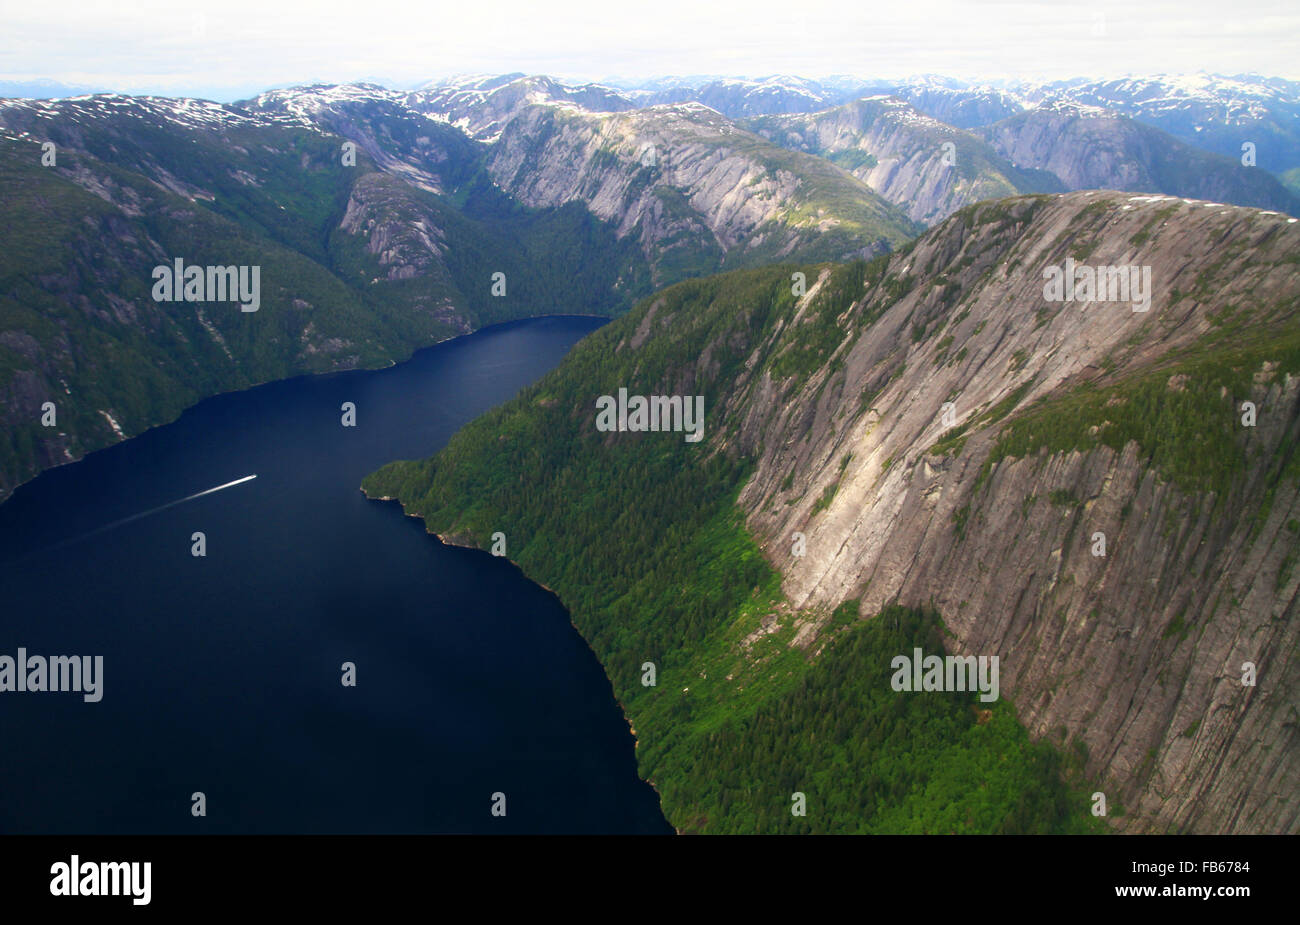 Aerial scenery during a sightseeing flight of mountains and Rudyerd Bay in the beautiful Misty Fjords near Ketchikan, Alaska Stock Photo